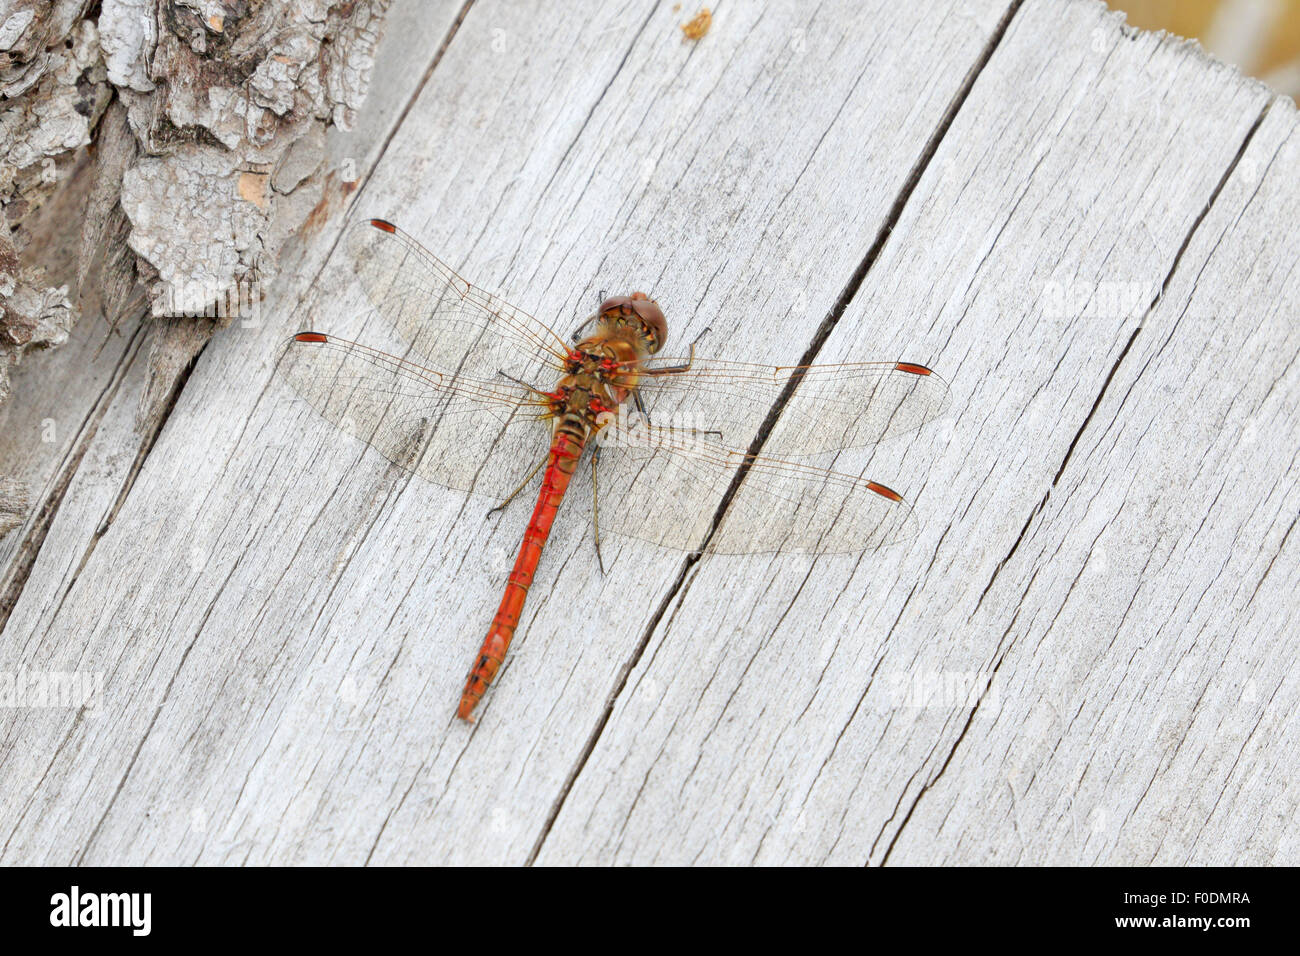 Mature Male Common Darter Dragonfly basking on a log Stock Photo